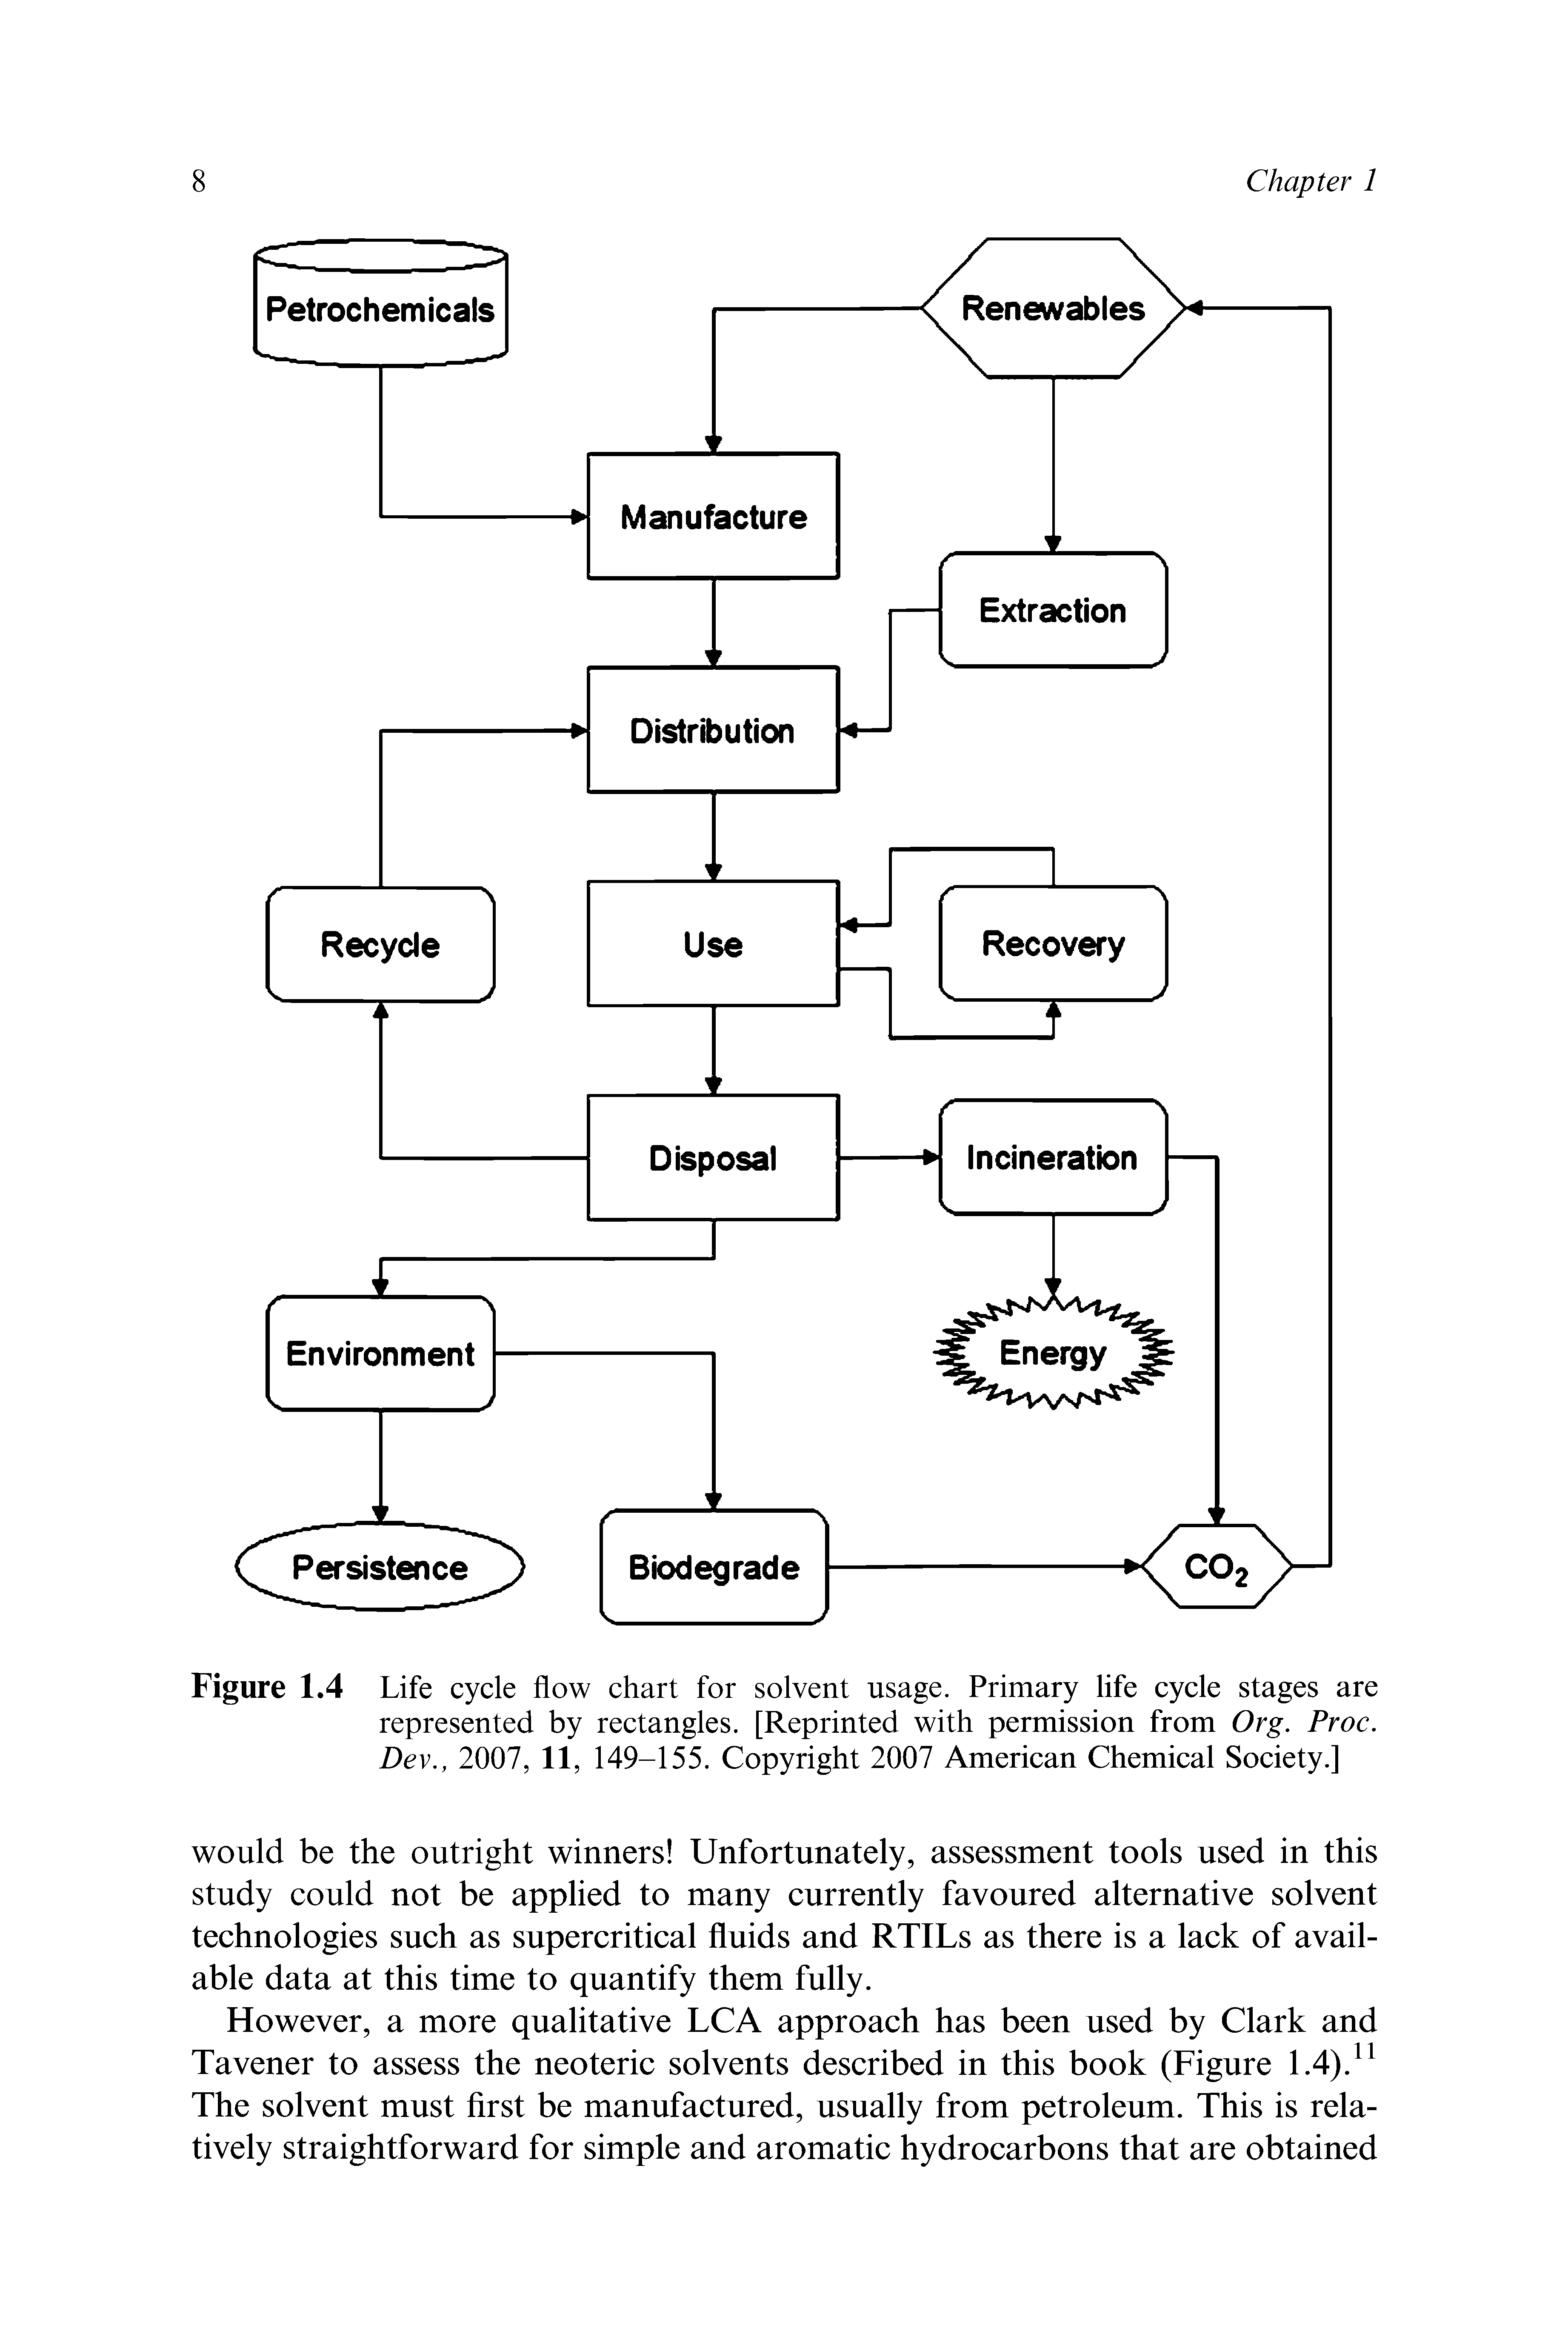 Figure 1.4 Life cycle flow chart for solvent usage. Primary life cycle stages are represented by rectangles. [Reprinted with permission from Org. Proc. Dev., 2007, 11, 149-155. Copyright 2007 American Chemical Society.]...